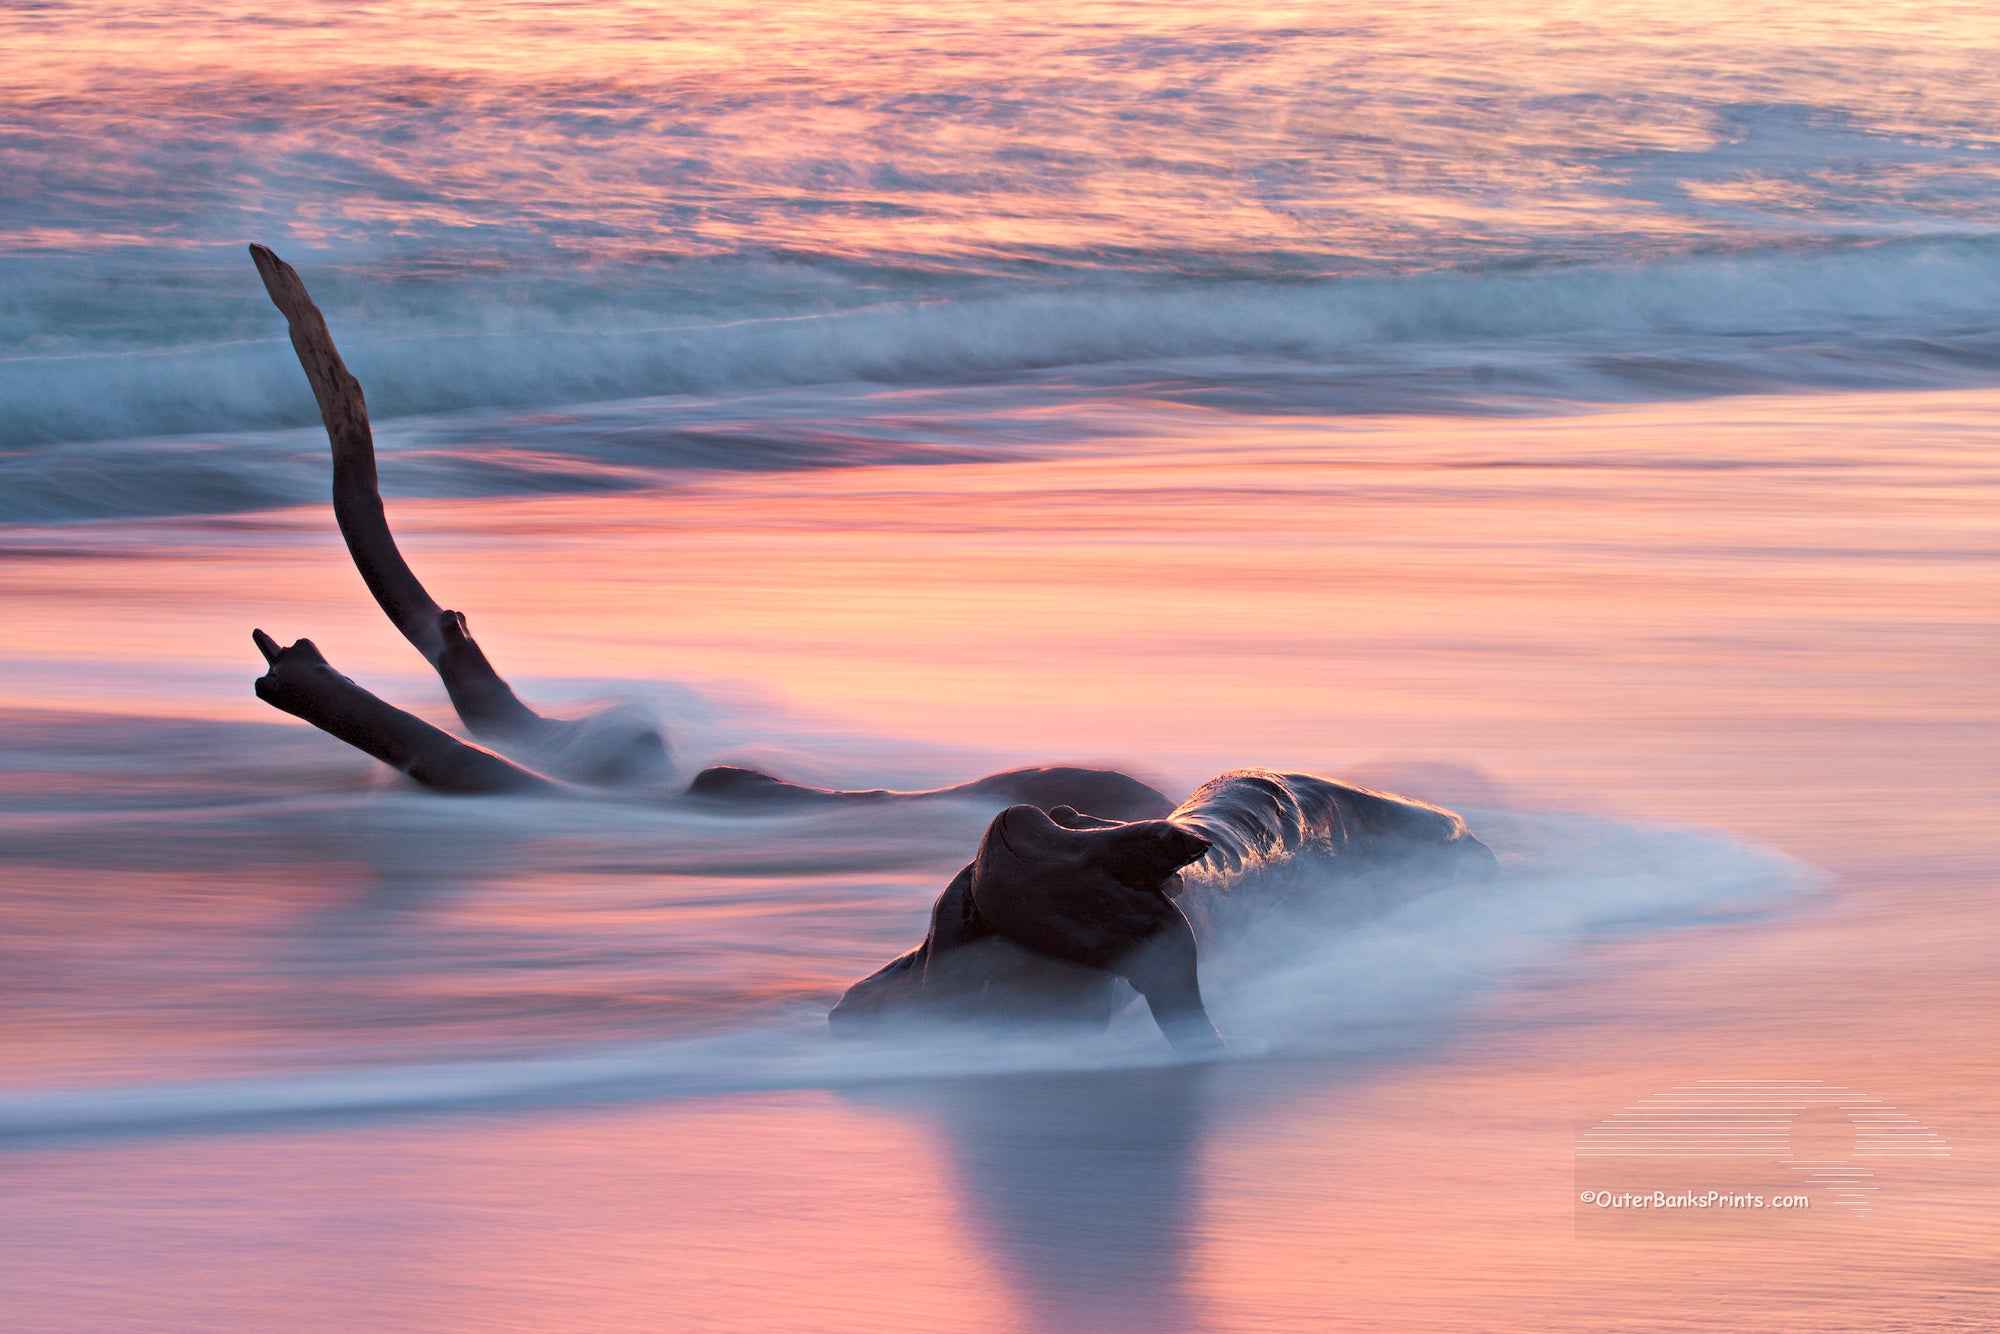 A long exposure of driftwood washed by the waves at sunrise on Kitty Hawk beach.